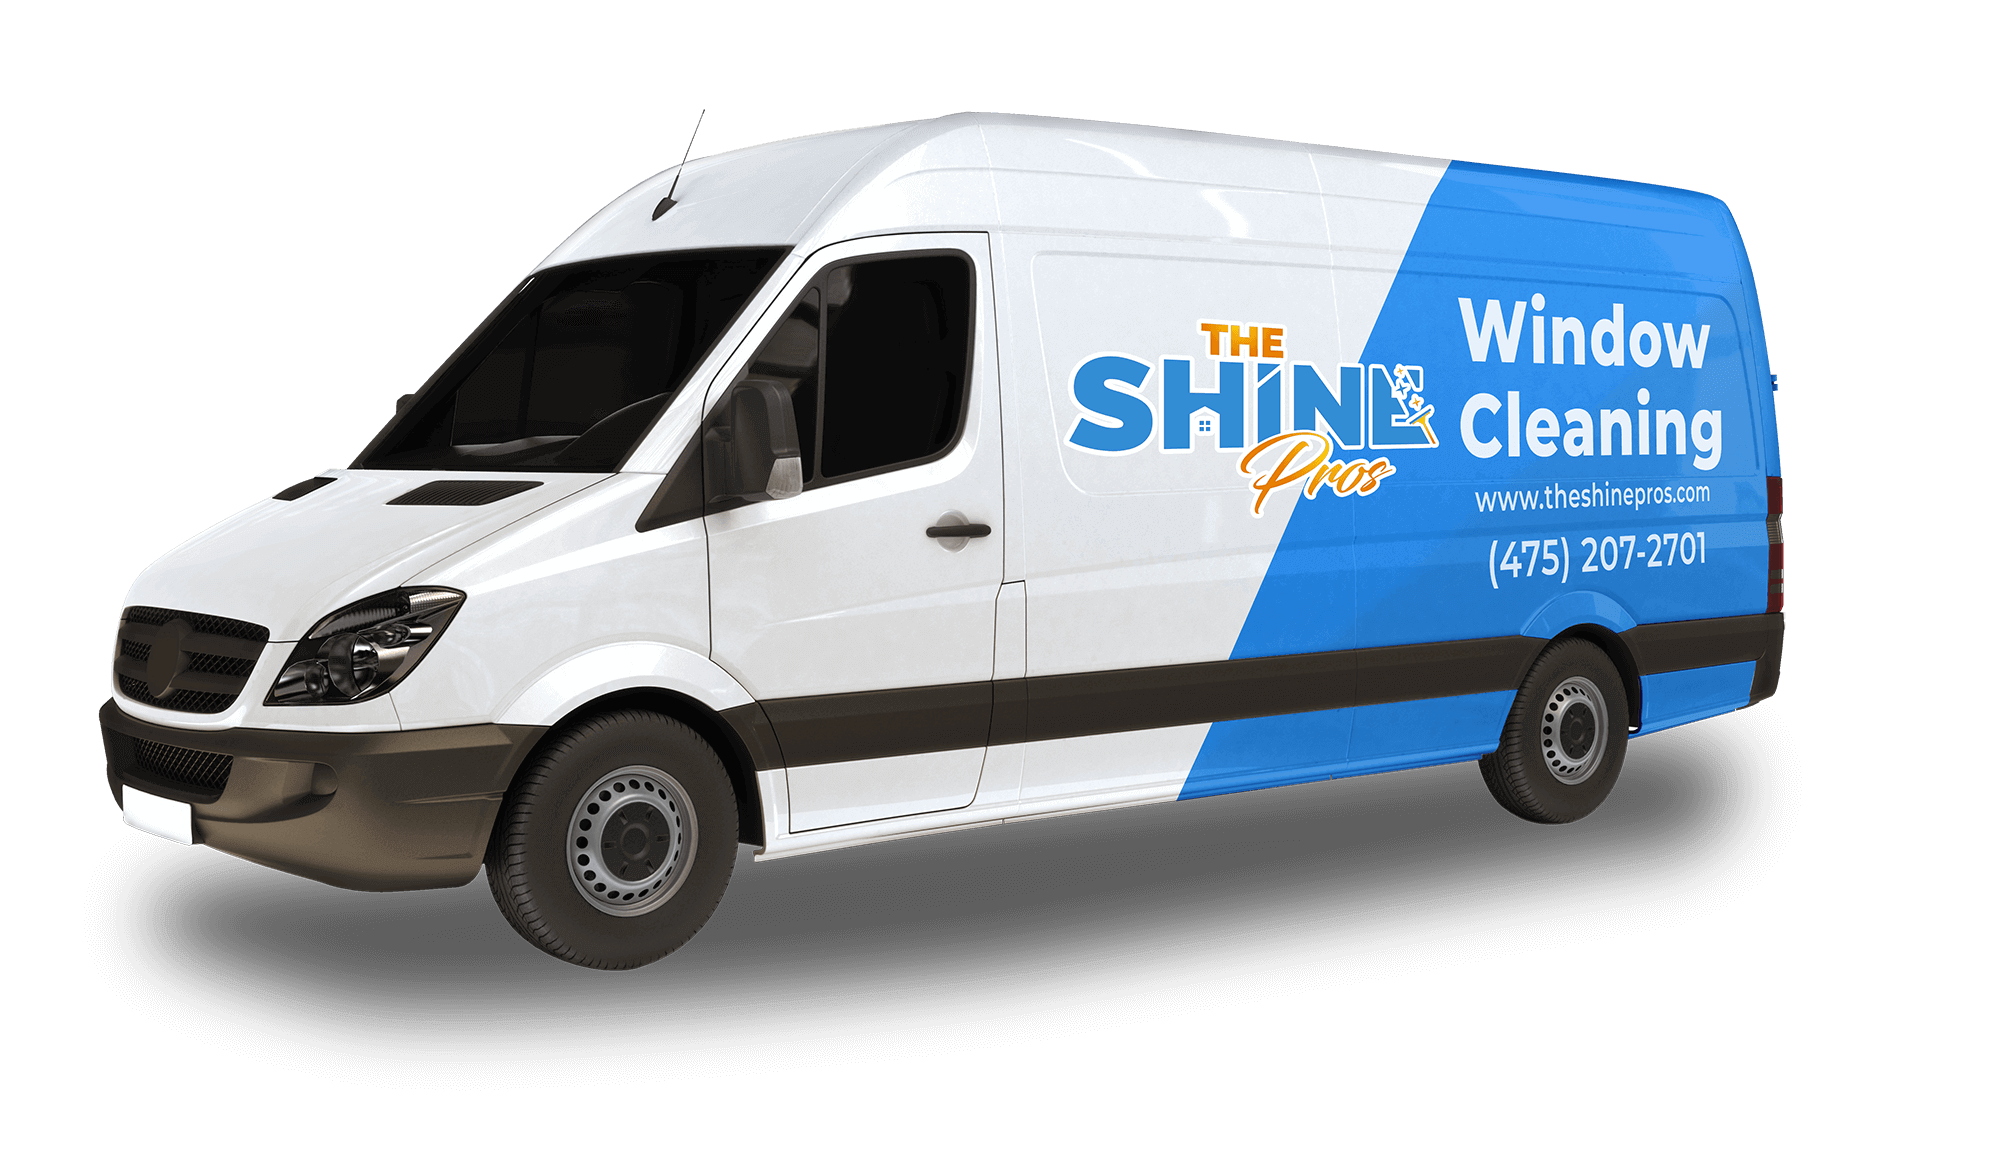 The Shine Pros Window Cleaning Van